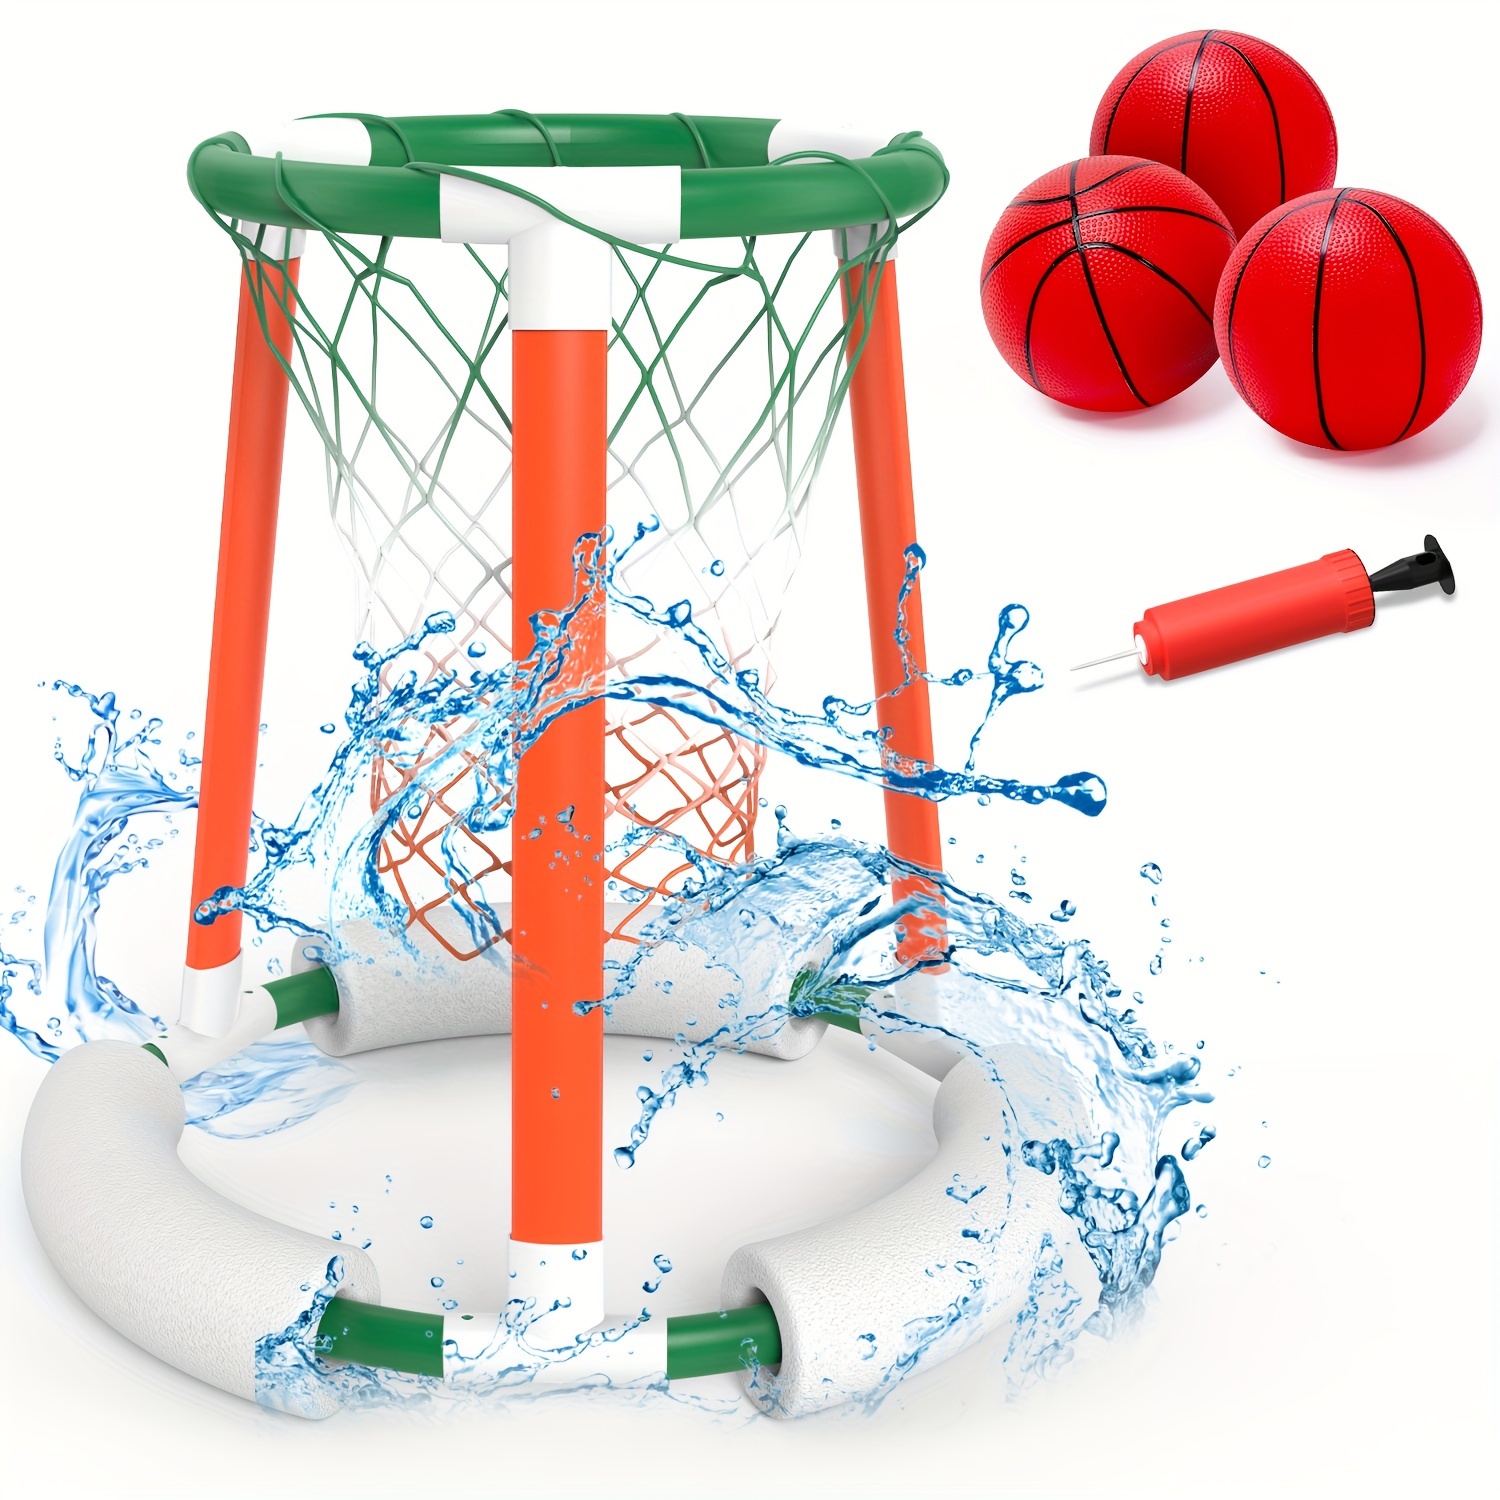 

Pool Basketball Hoop, Floating Inflatable Pool Basketball Games Toys With 3 Pool Balls And Pump, Swimming Pool Outdoor Play Toddler Basketball Hoop Indoor For Kids Adults Aged 8-12